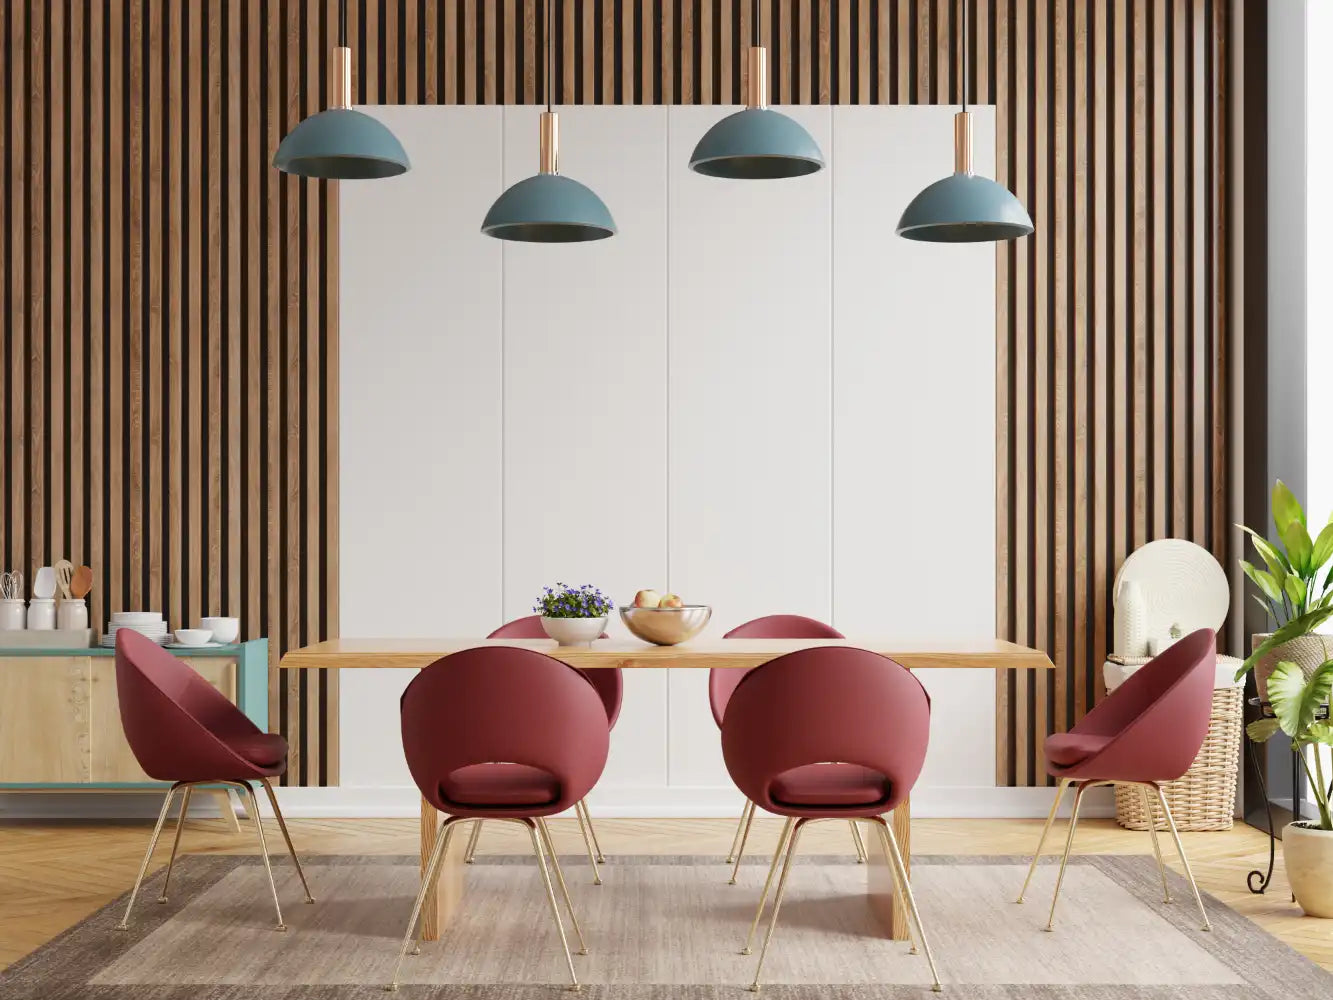 Modern dining area with vertical wood wall panels and stylish furniture, highlighting types of decorative wood wall panels